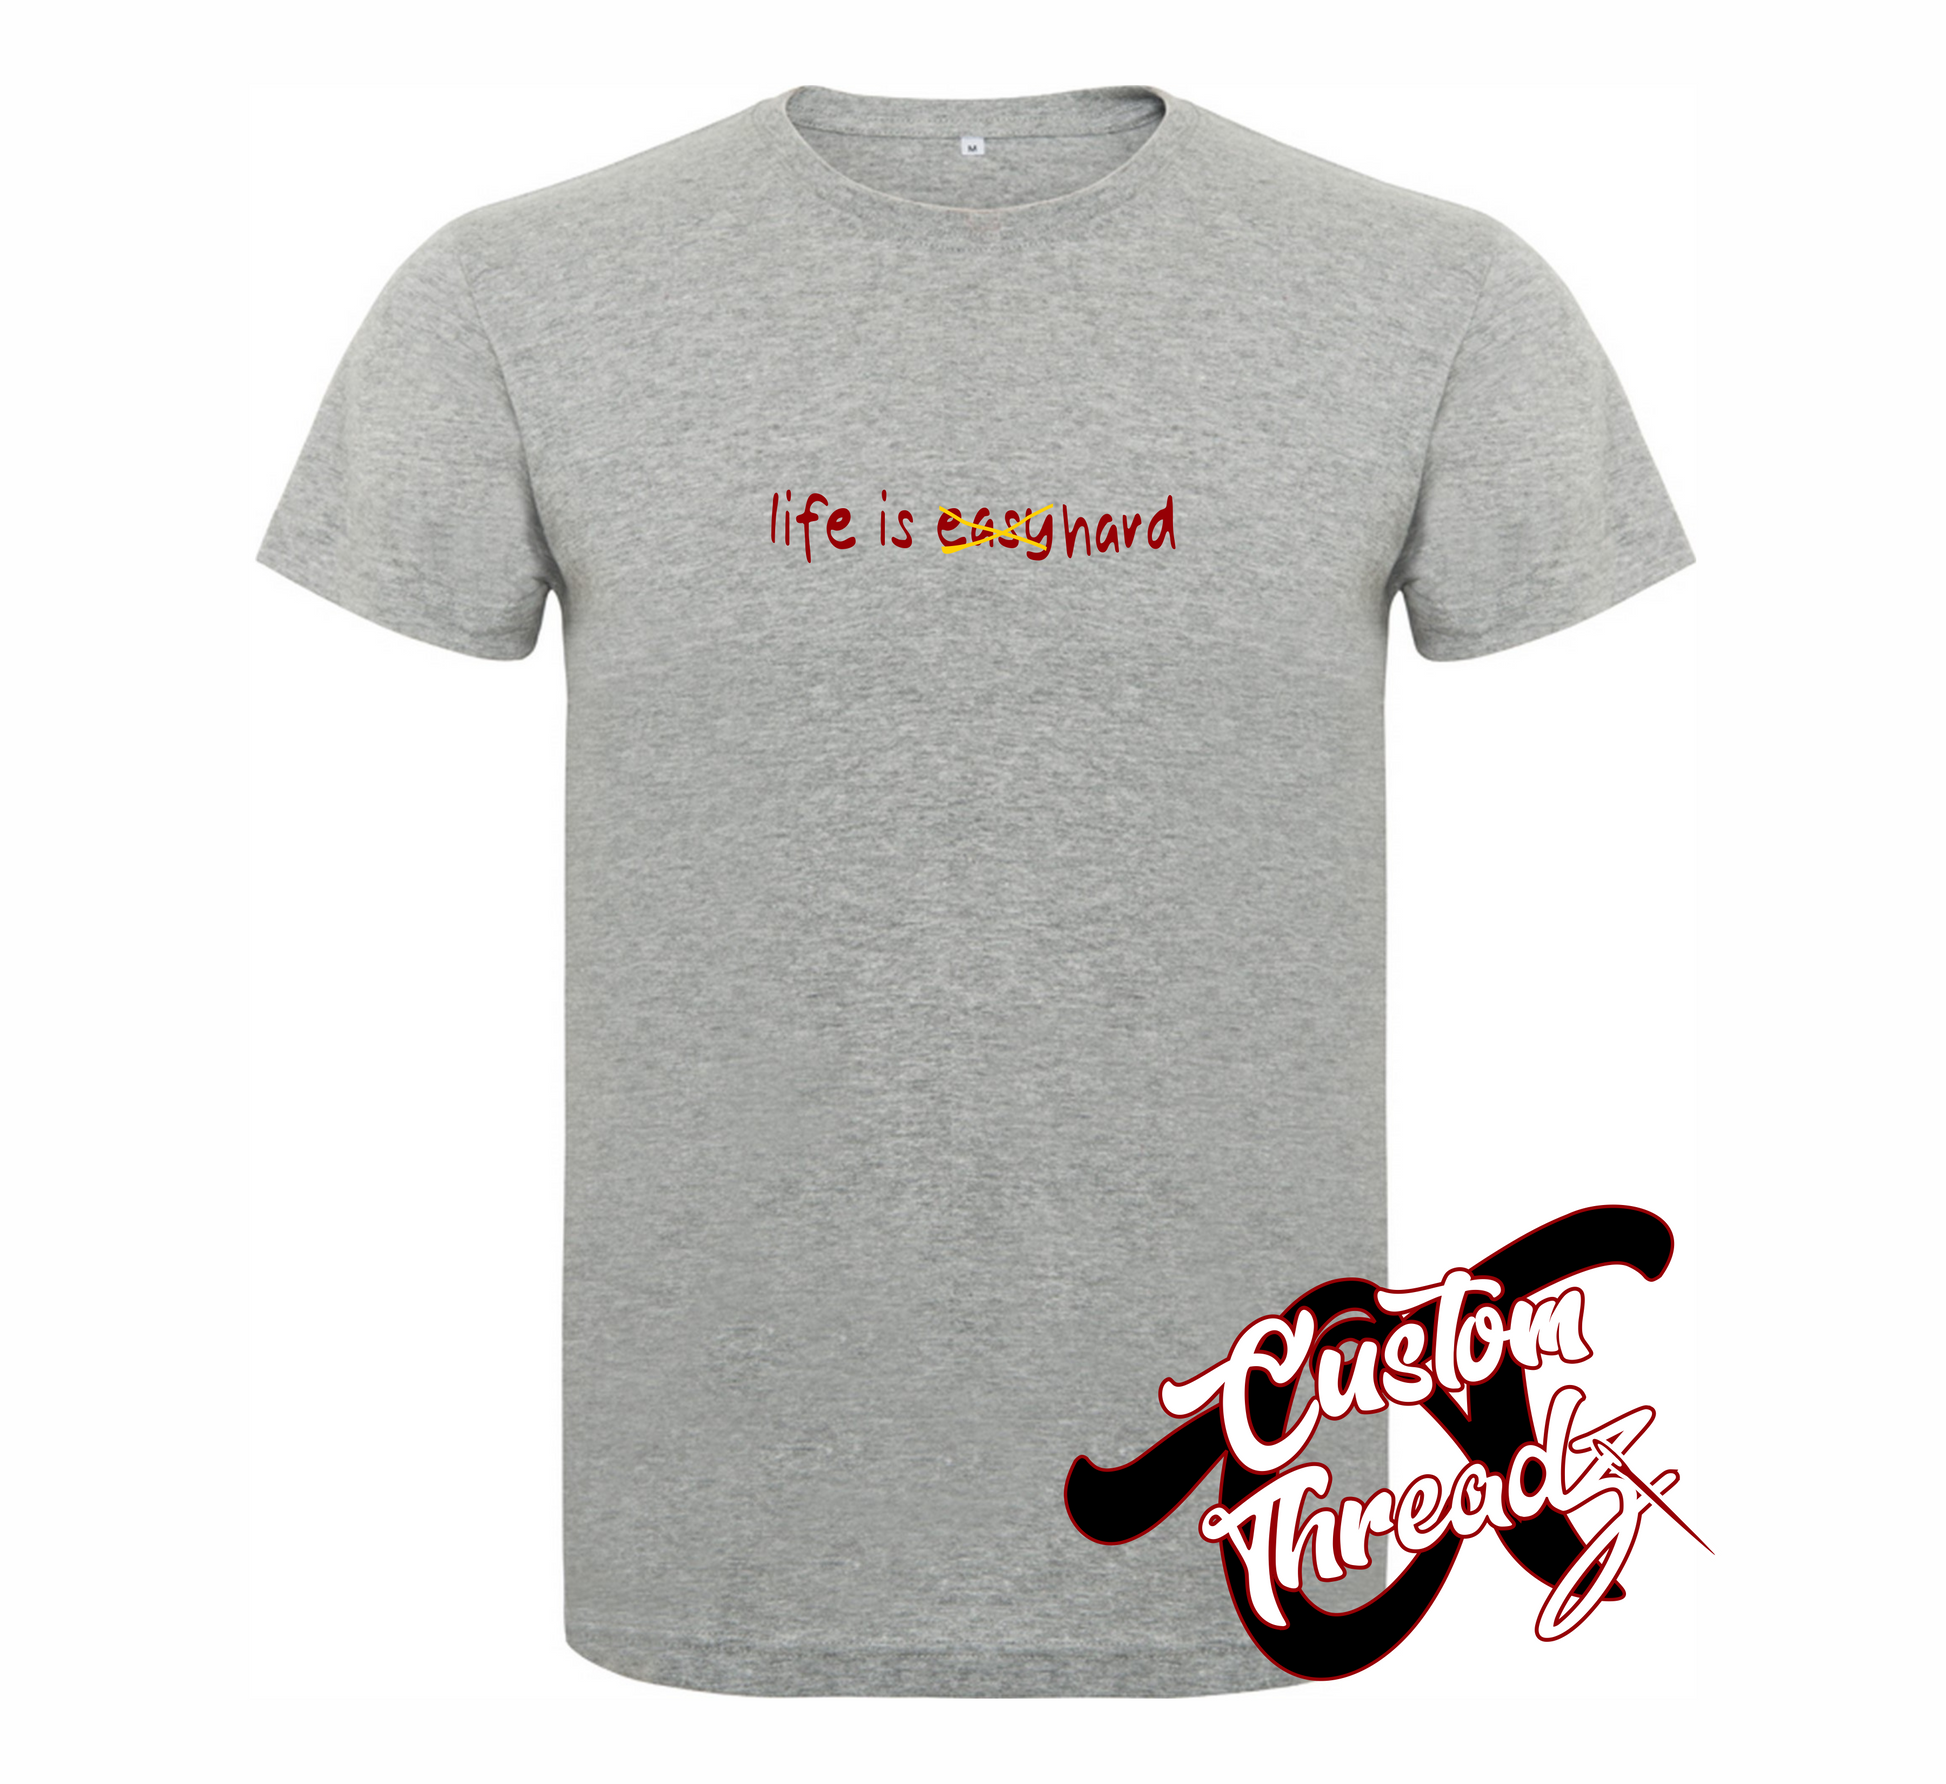 athletic heather t-shirt with life is easy crossed out hard DTG printed design